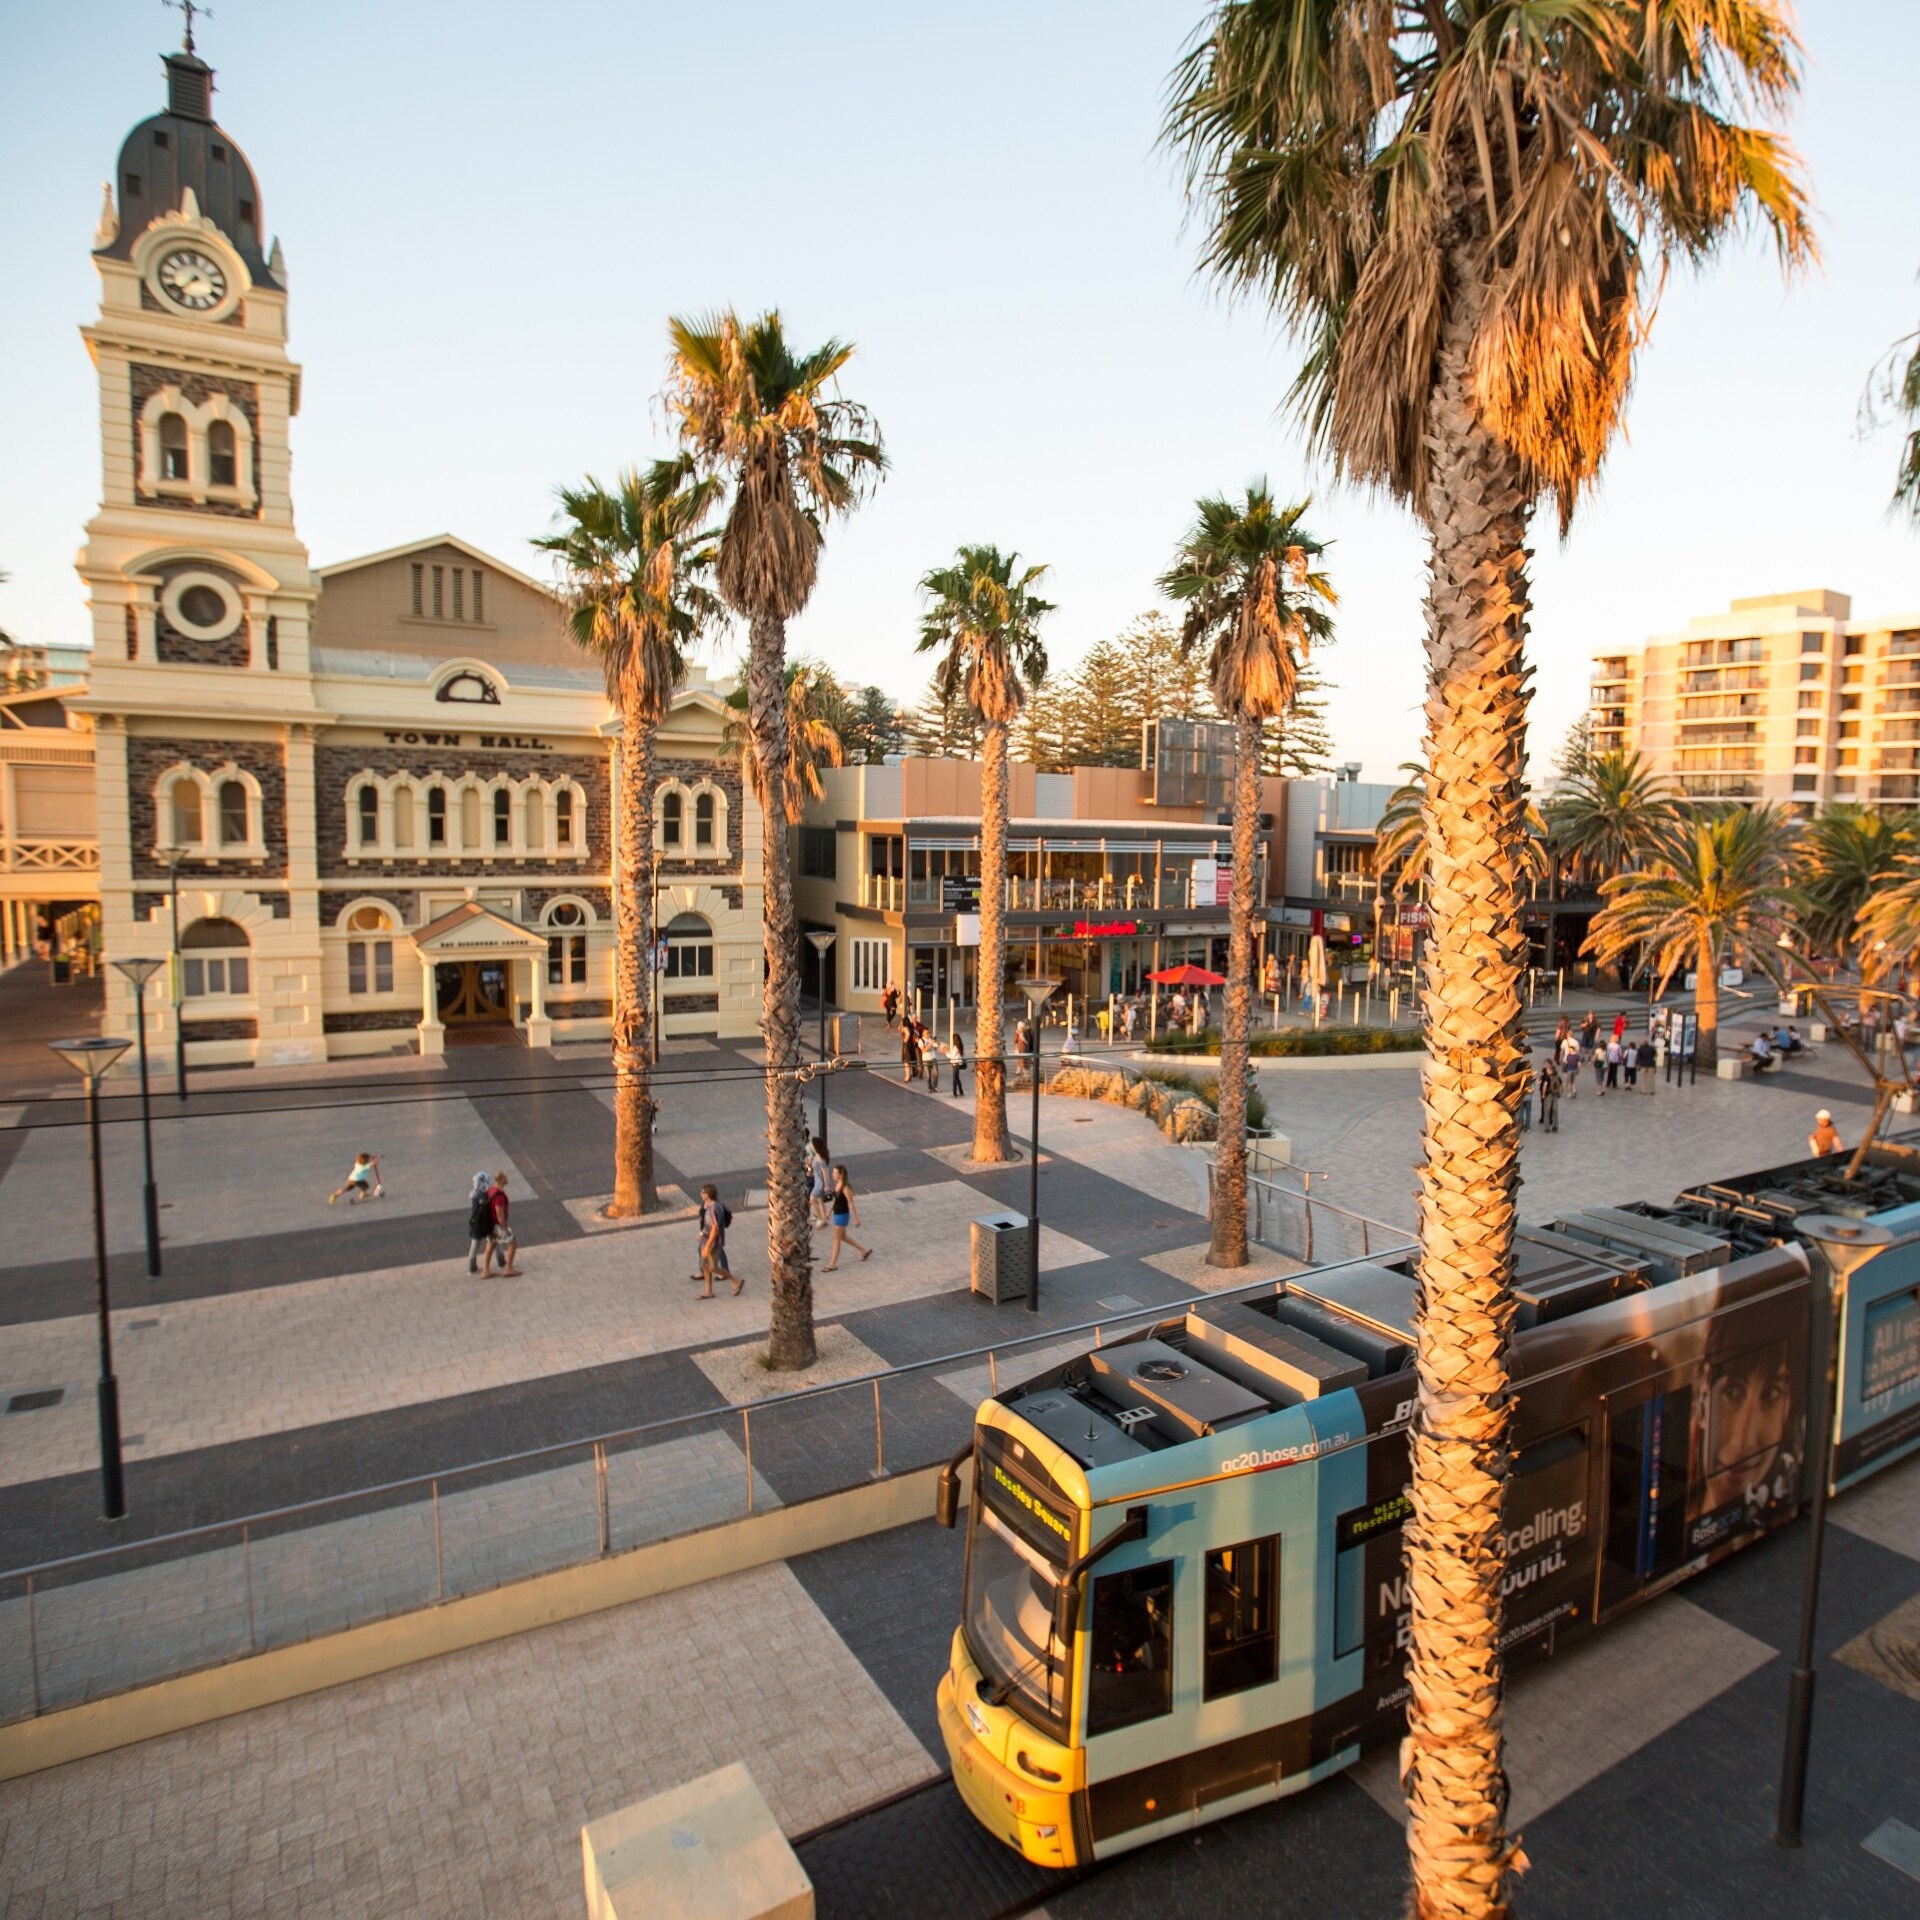 Tram at Moseley Square in Adelaide © Greg Snell/Tourism Australia